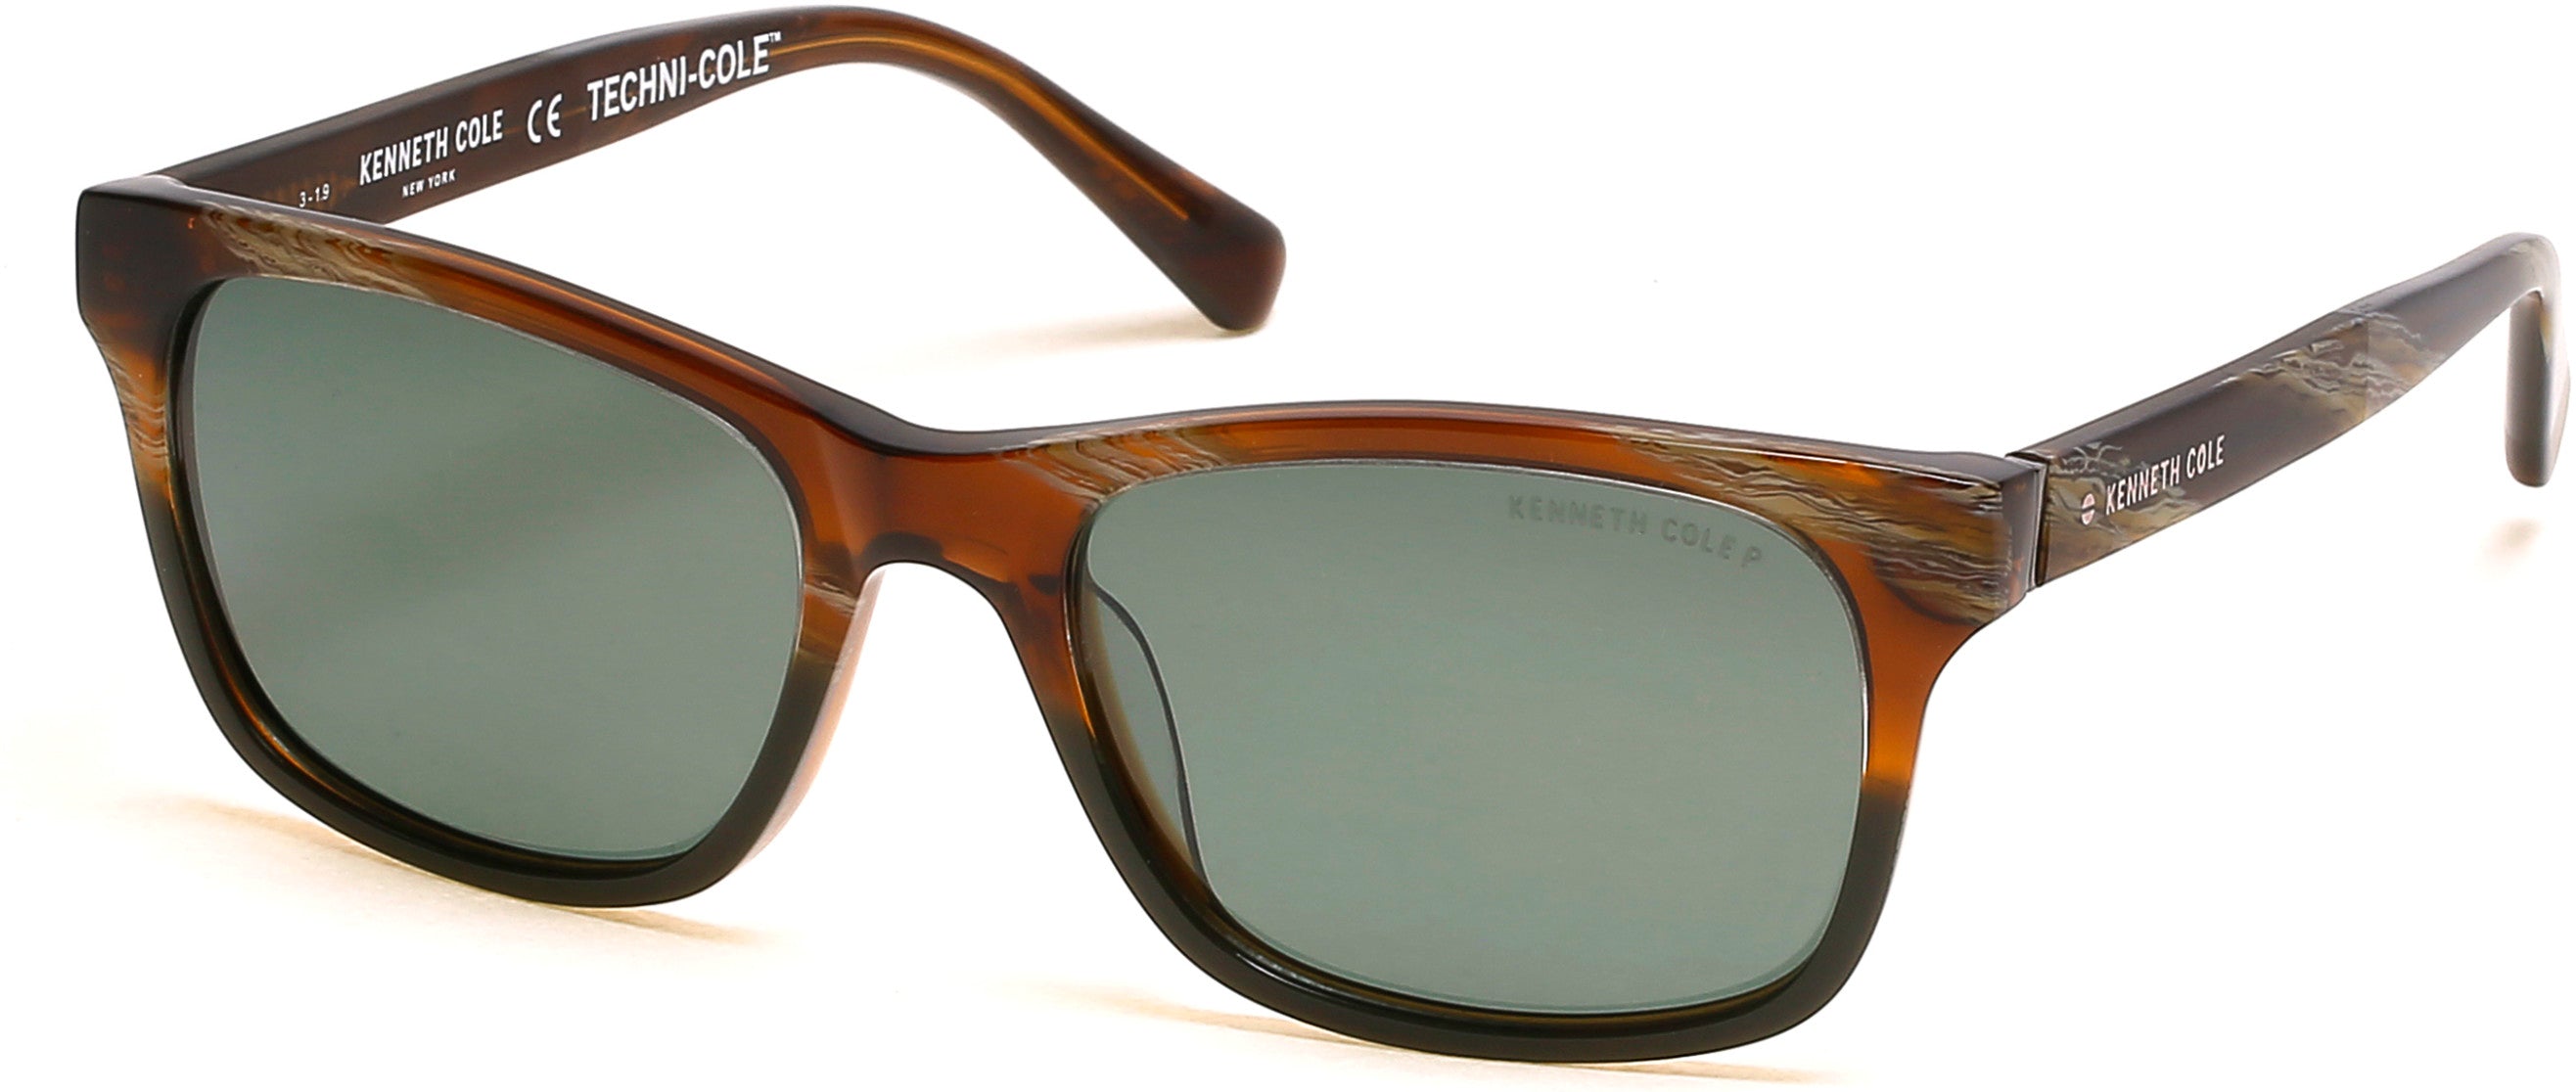 Kenneth Cole New York,Kenneth Cole Reaction KC7240 Square Sunglasses 98H-98H - Dark Green / Brown Polarized